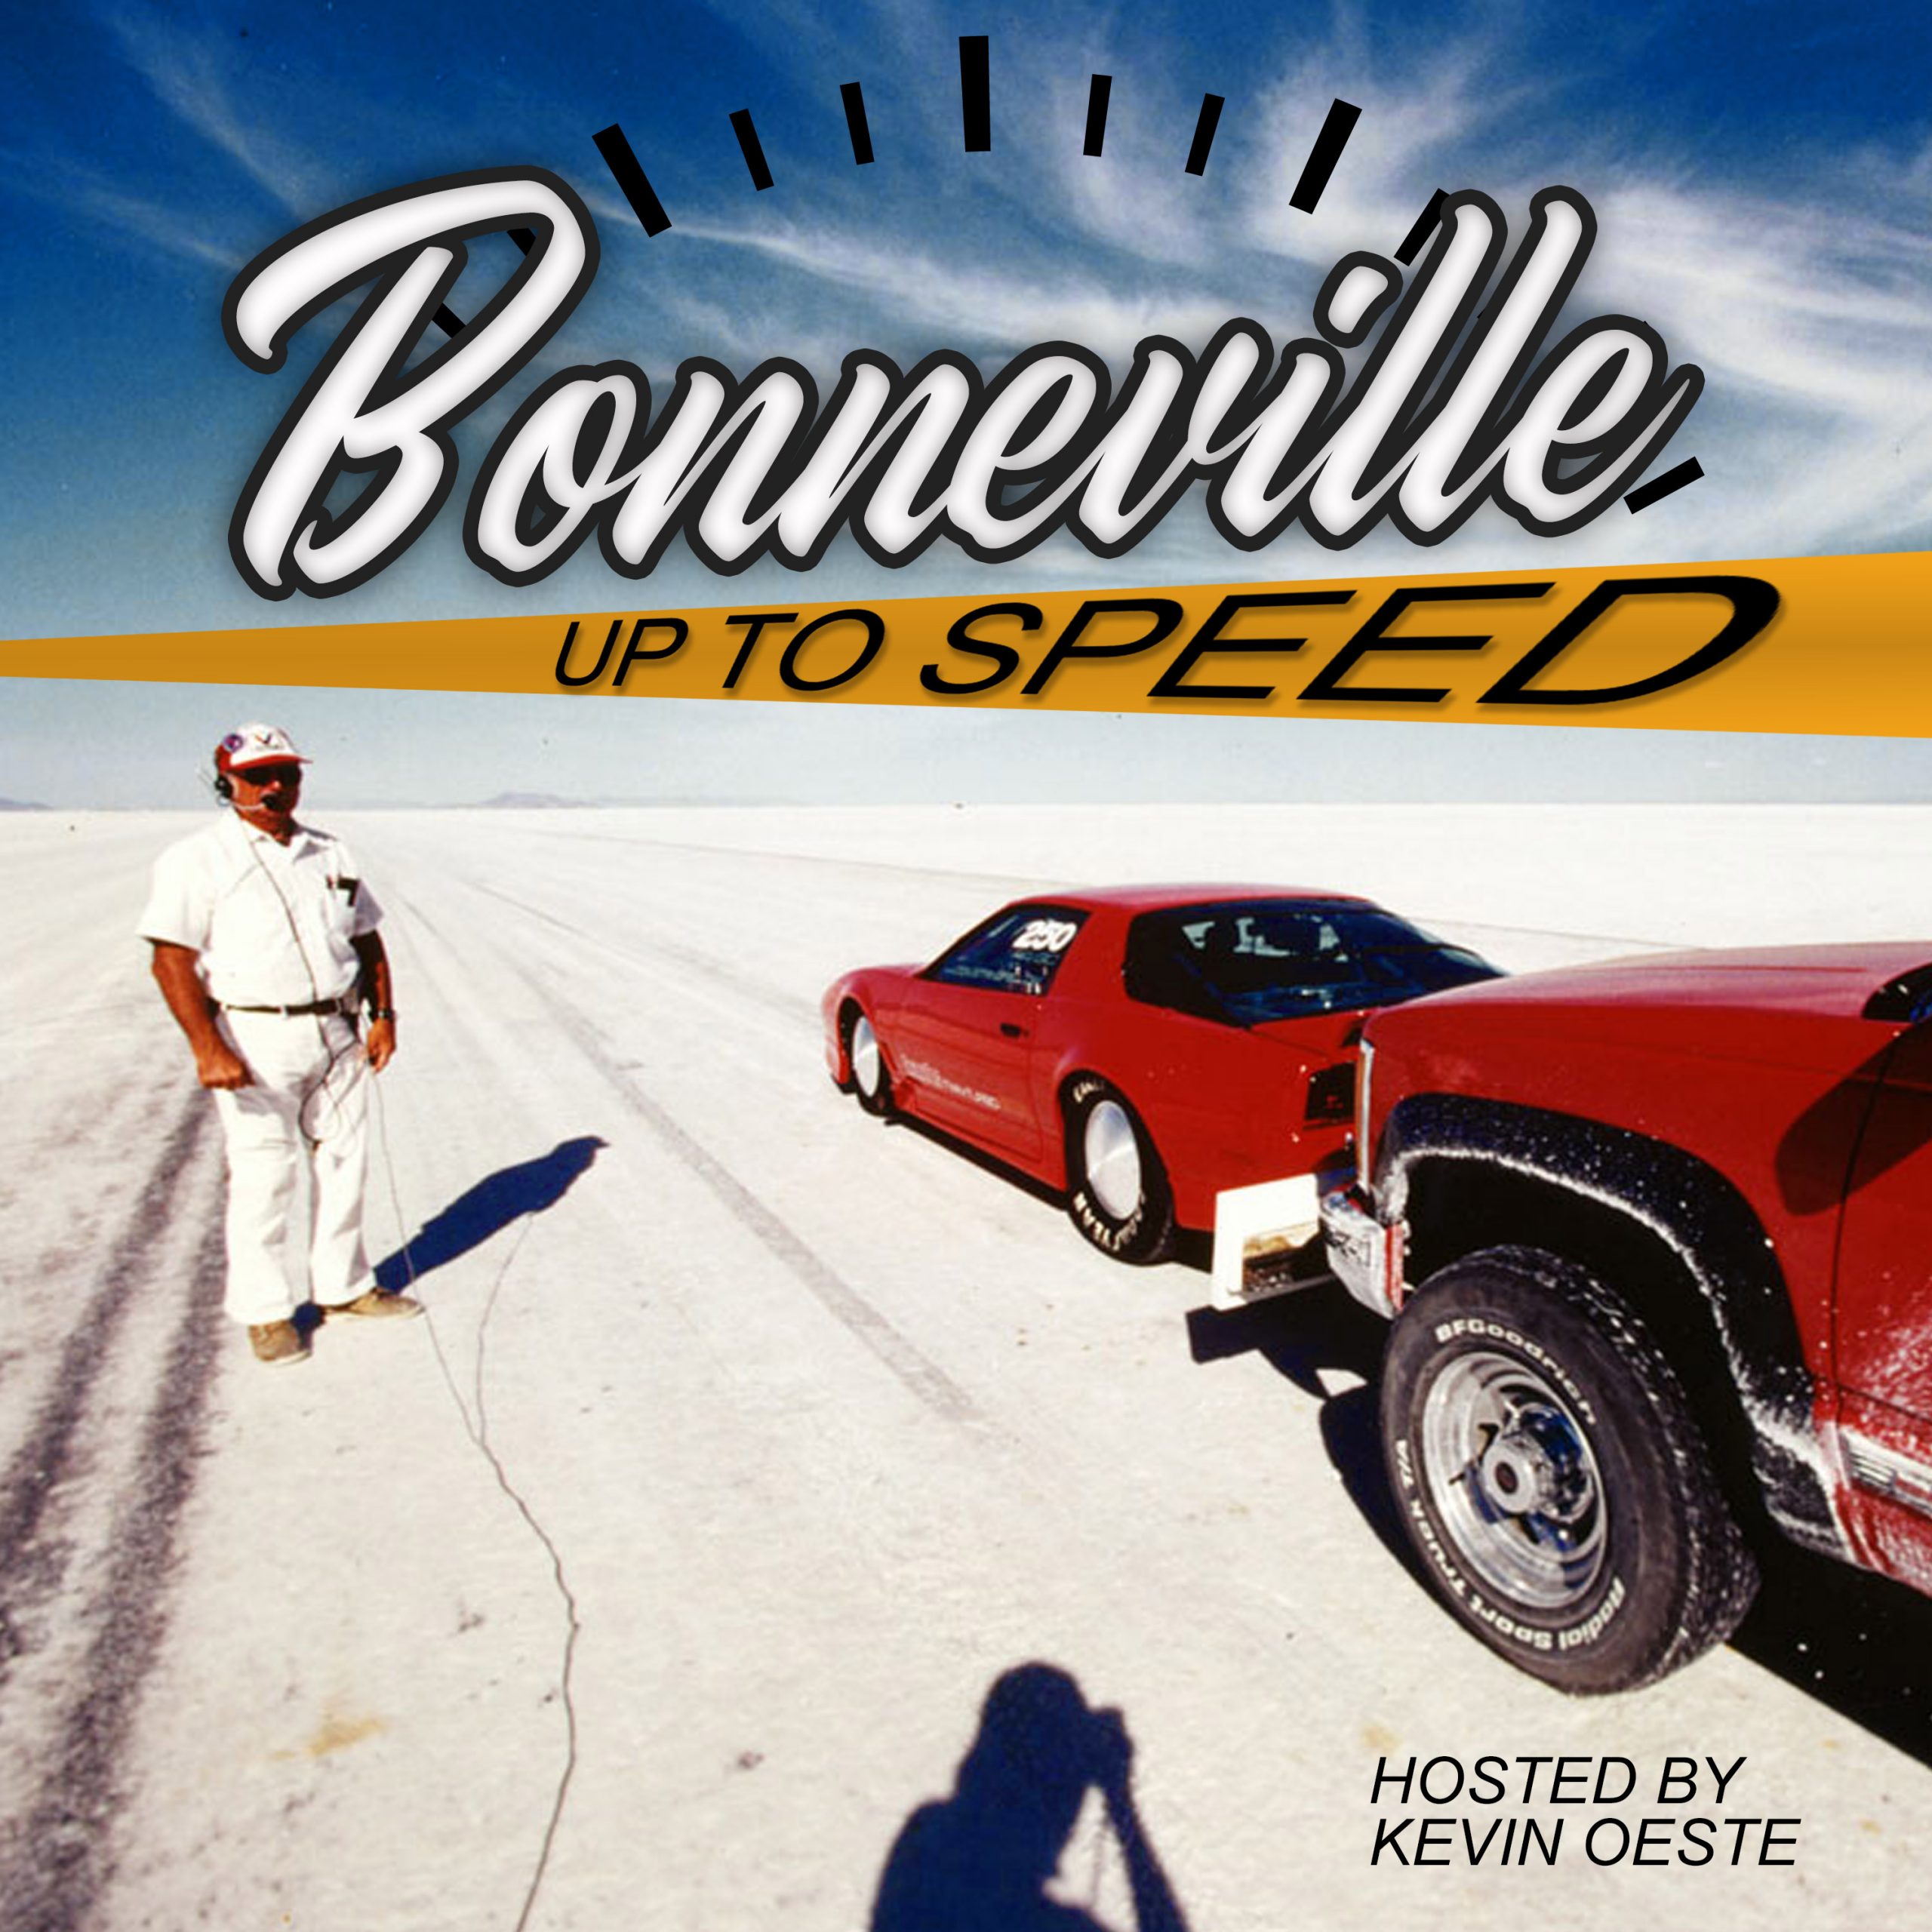 Life Under Pressure with Gale Banks on the Bonneville Up To Speed Podcast